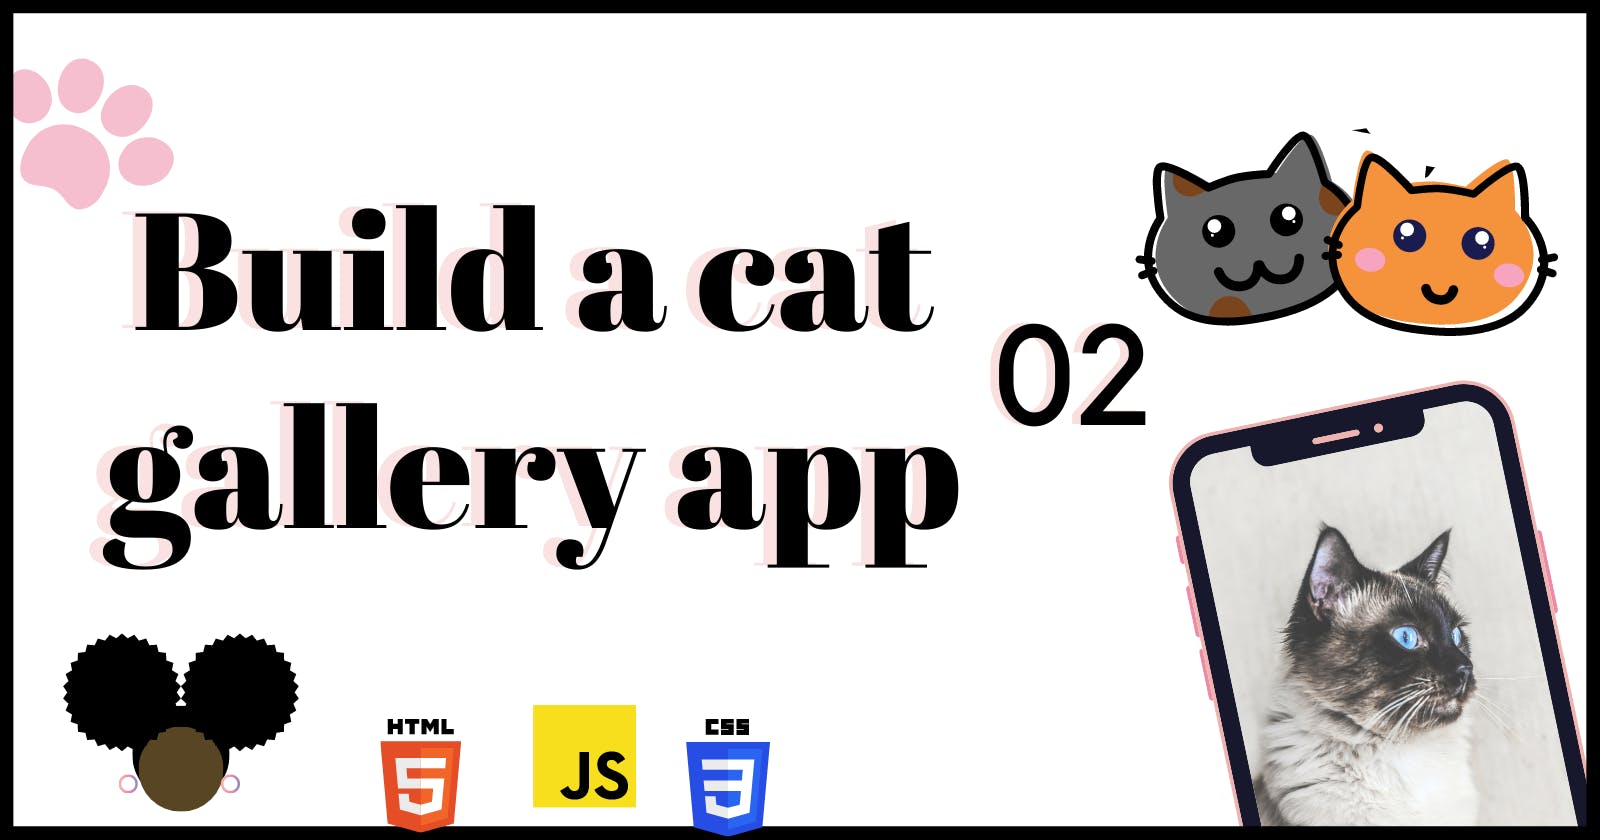 Build a cat gallery application - Part 2